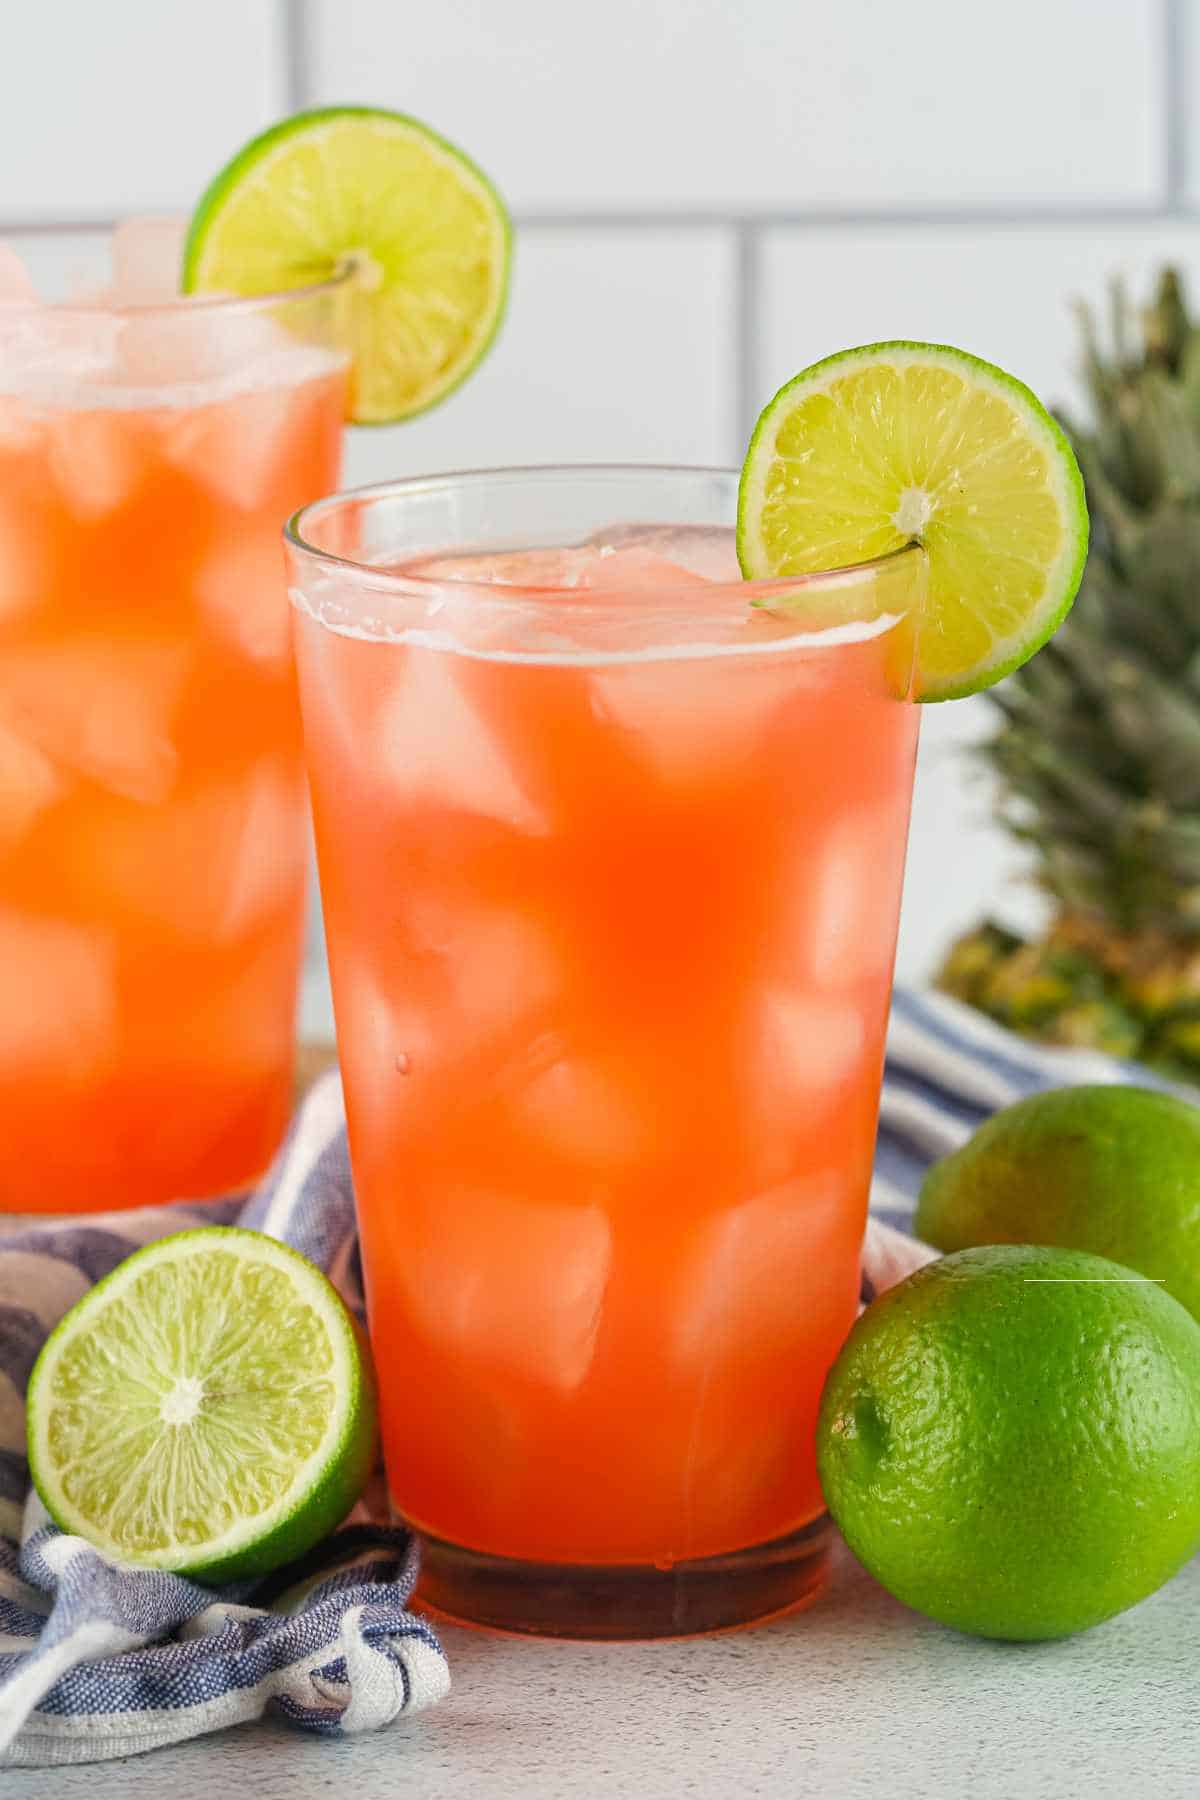 bacardi rum punch in a glass garnished with lime slices.